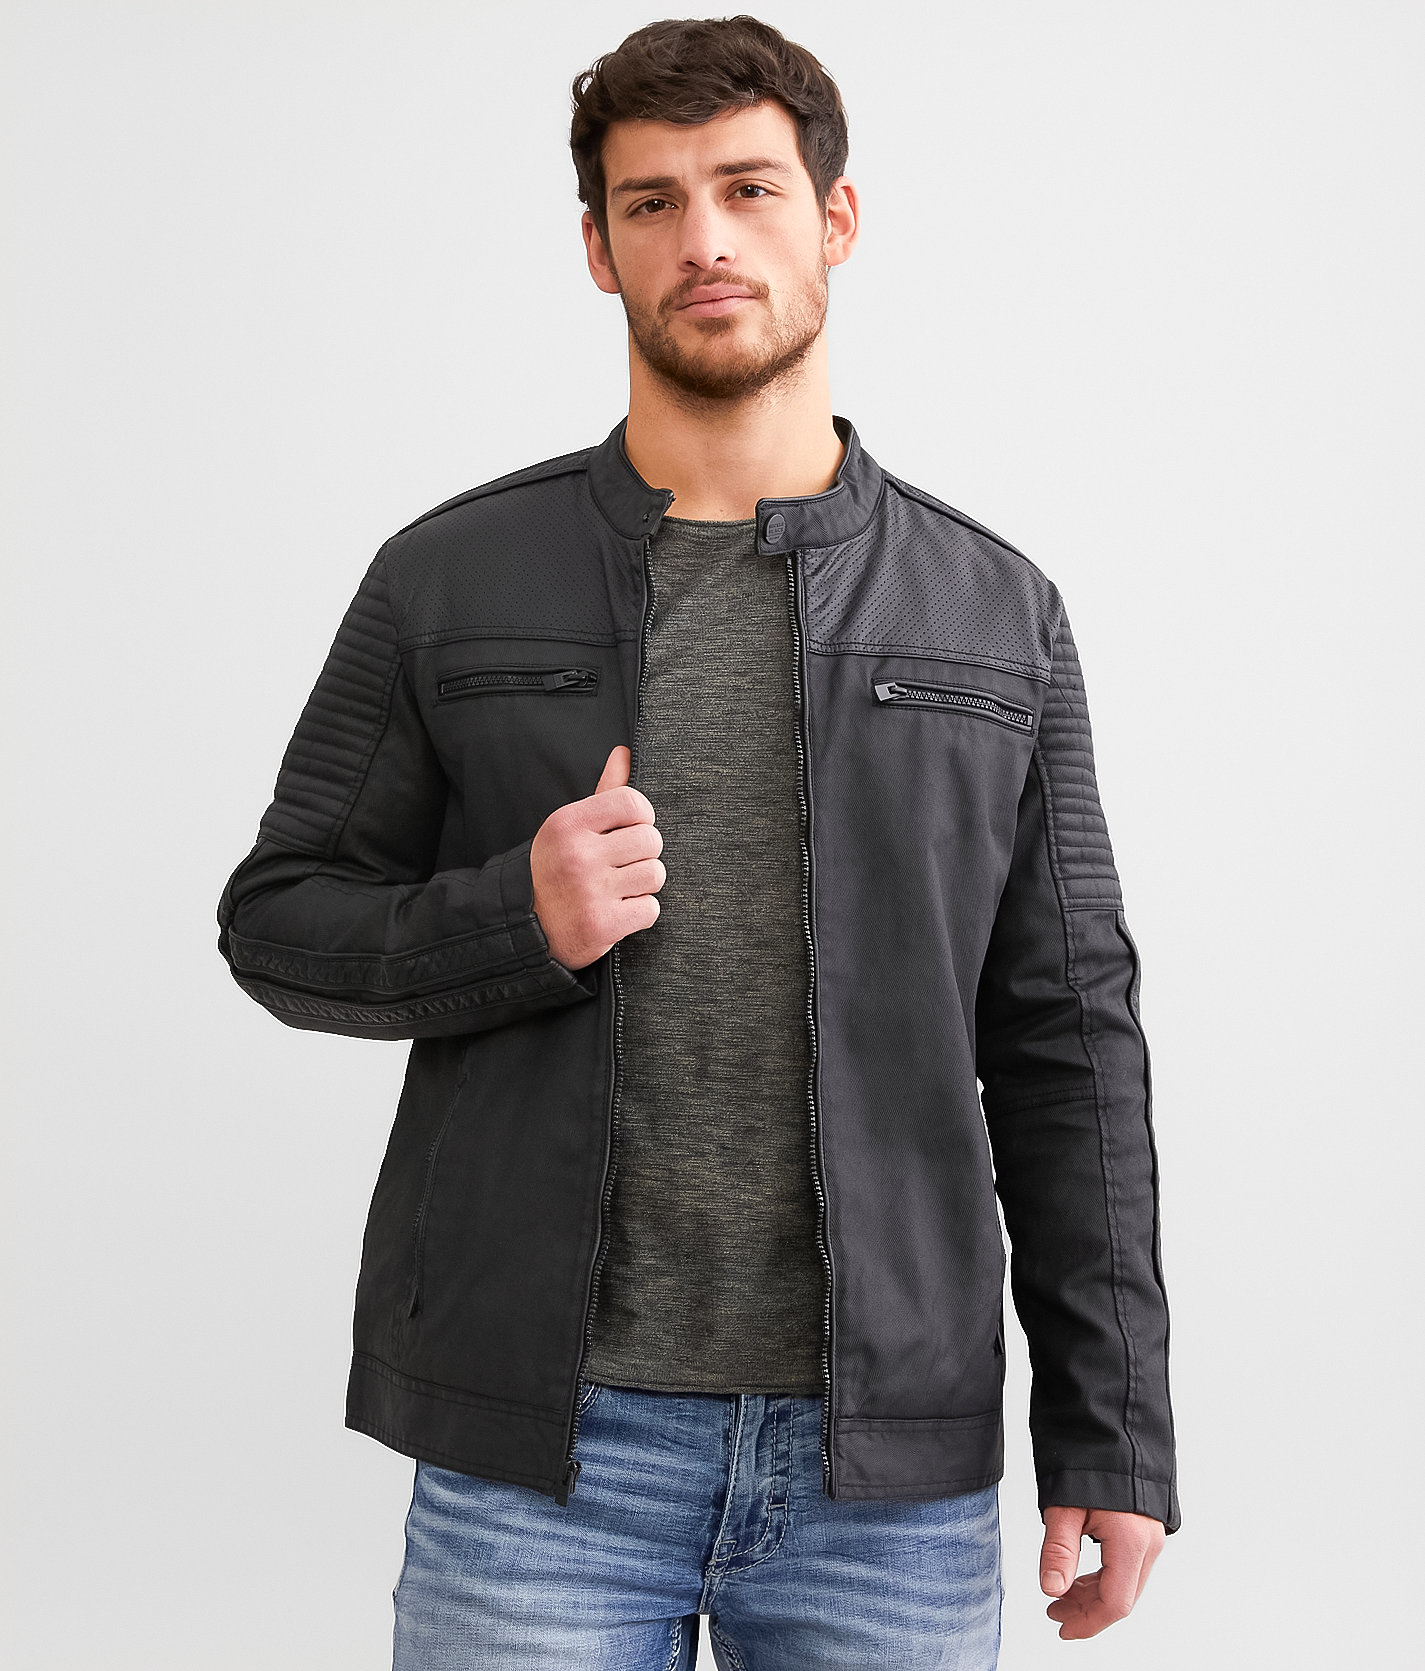 Buckle Black Perforated Faux Leather Jacket - Men's Coats/Jackets in Black  | Buckle